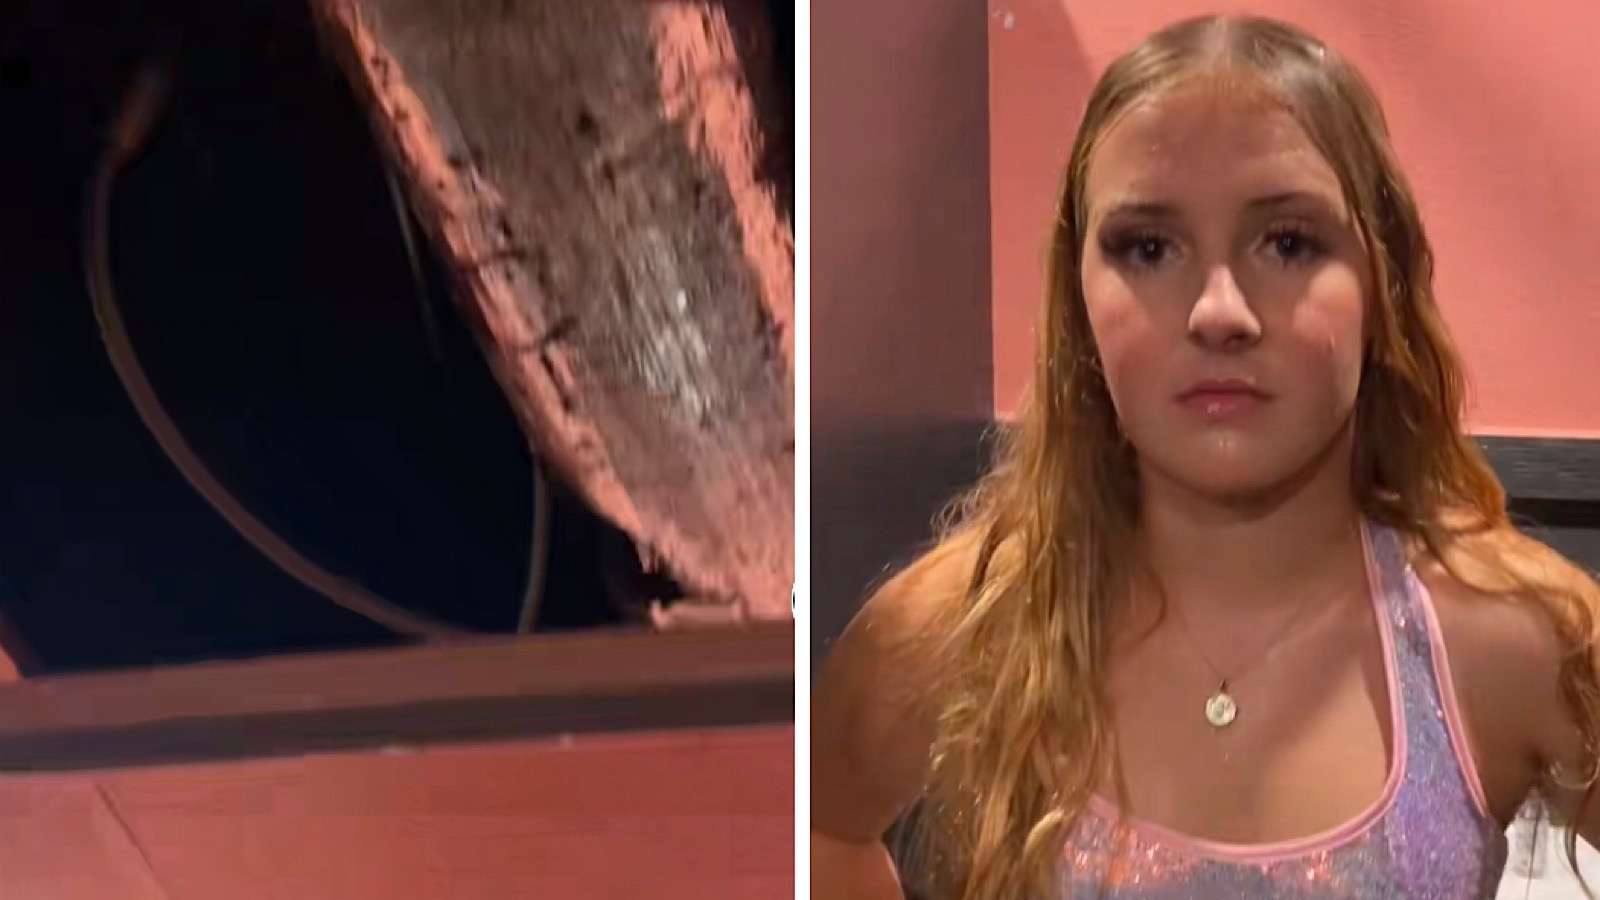 ceiling collapsed on a girl while using a bathroom at a bar